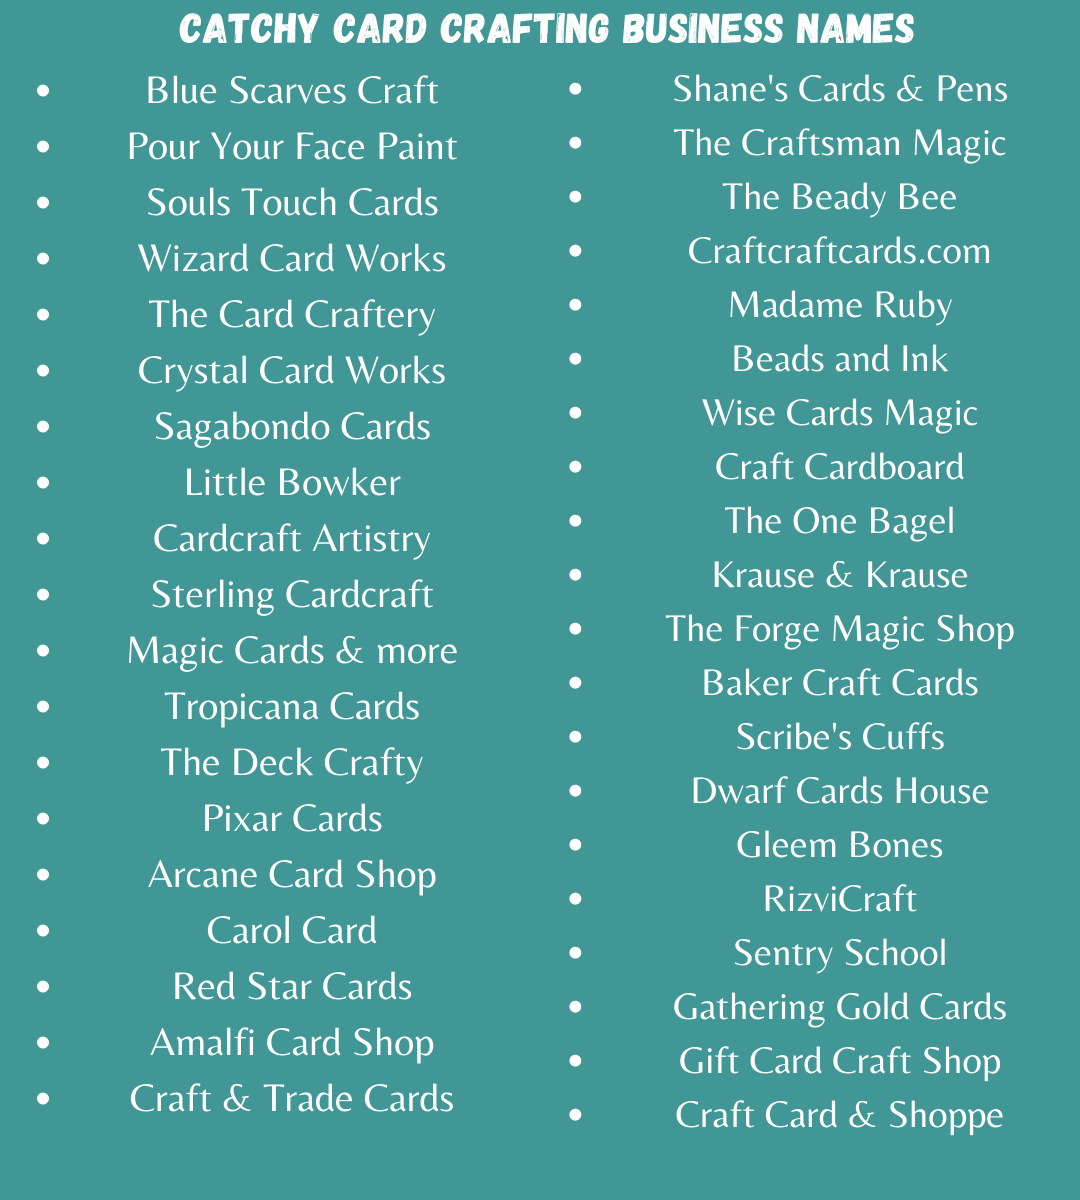 Catchy Card Crafting Business Names